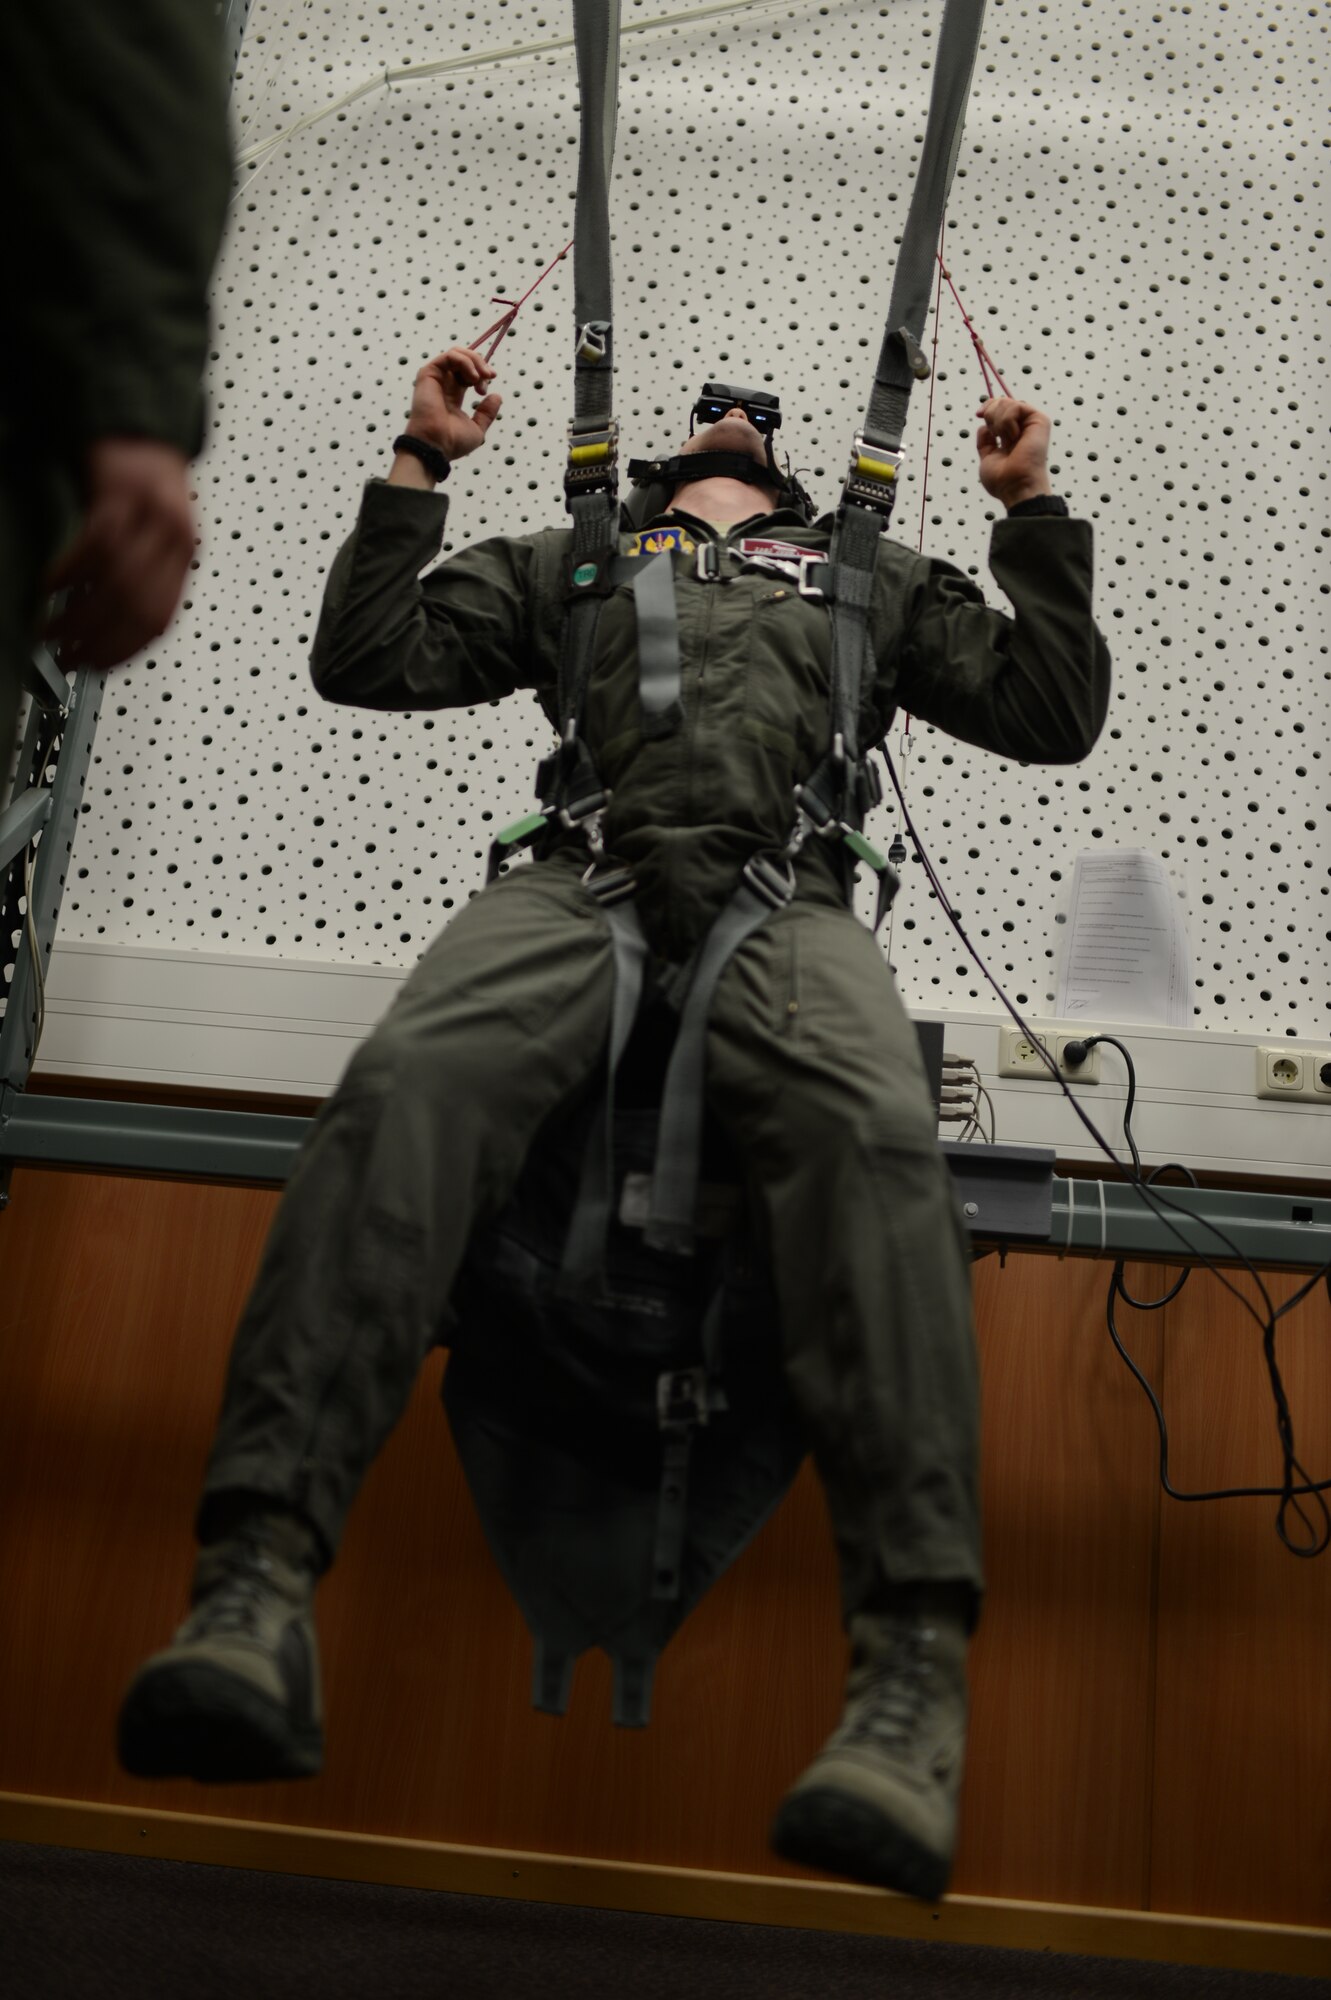 U.S. Air Force Tech. Sgt. John Long, 52nd Operations Support Squadron NCO in charge of weapons and tactics from Clyde Park, Mont., operates a parachute simulator at Spangdahlem Air Base, Germany, Feb. 24, 2014. The simulator mimics canopy control and parachute malfunctions through a heads-up display. (U.S. Air Force photo by Senior Airmen Gustavo Castillo/Released)